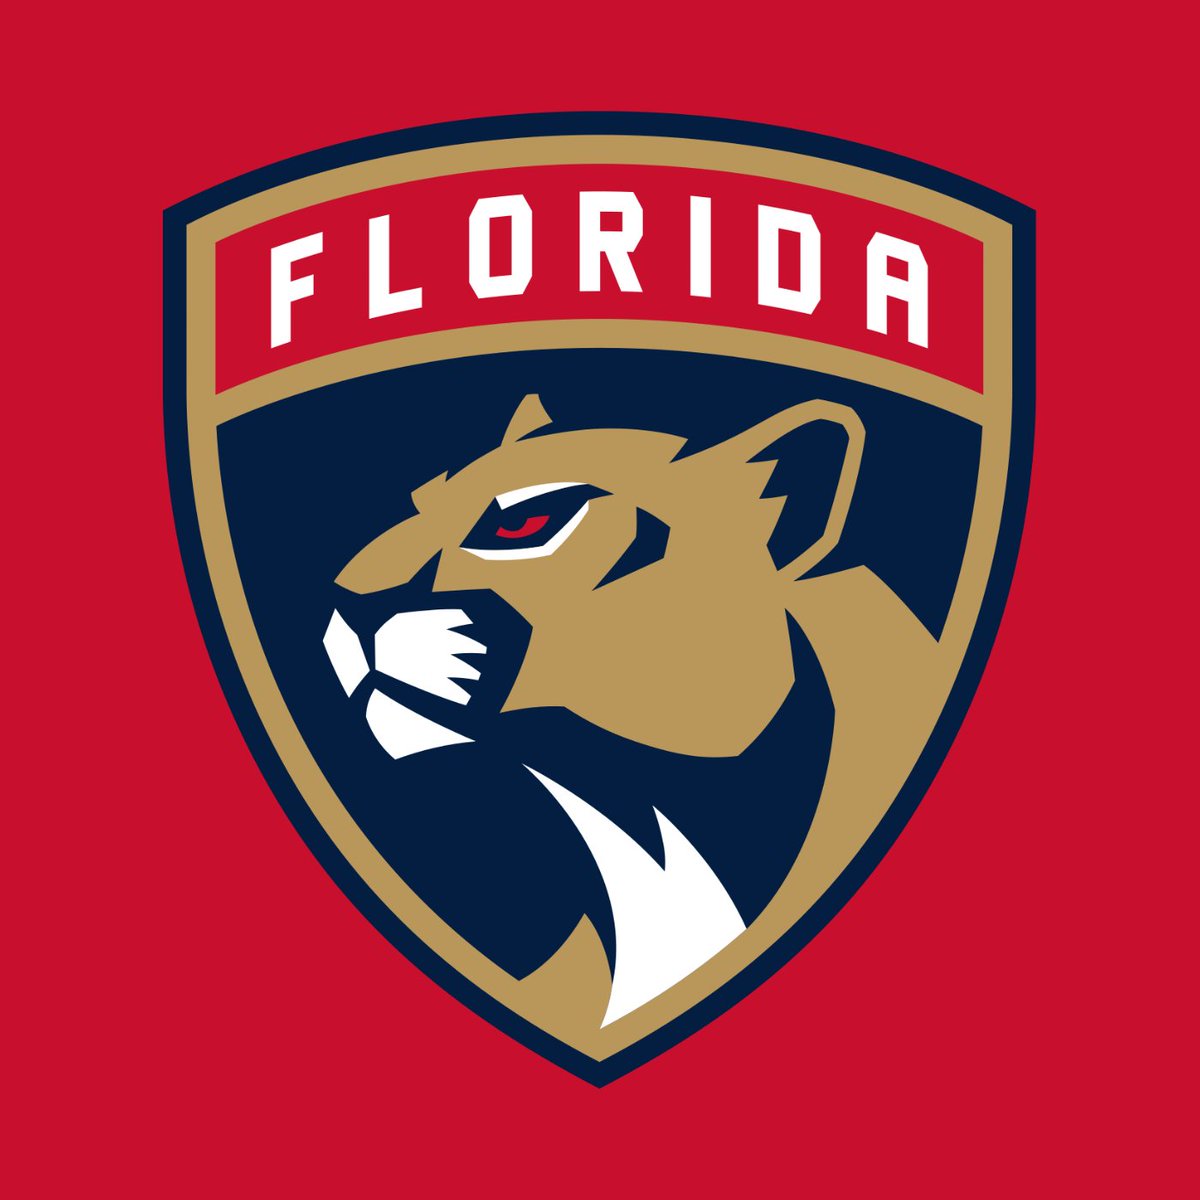 With the 120th overall selection in the NHL Draft, the Florida Panthers are proud to select: Shadow the Hedgehog. https://t.co/AIbhZC0ly1